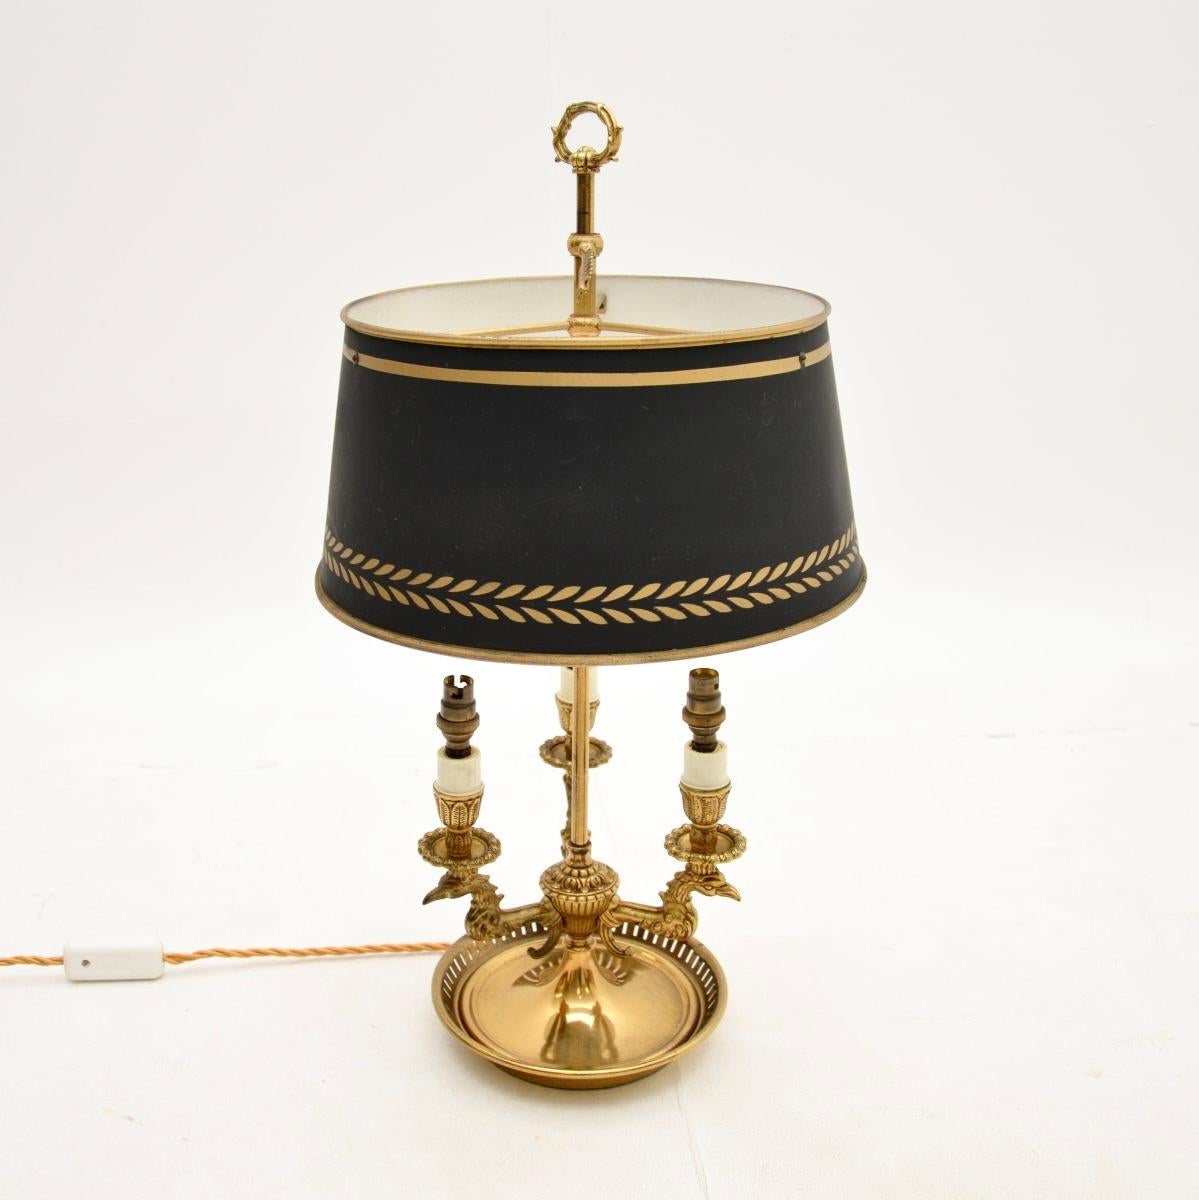 A beautiful antique brass and tole table lamp, made in England and dating from around the 1920’s.

It is of superb quality, with fine and intricate details, including eagles head candelabra. The tole shade is original and can be raised up and